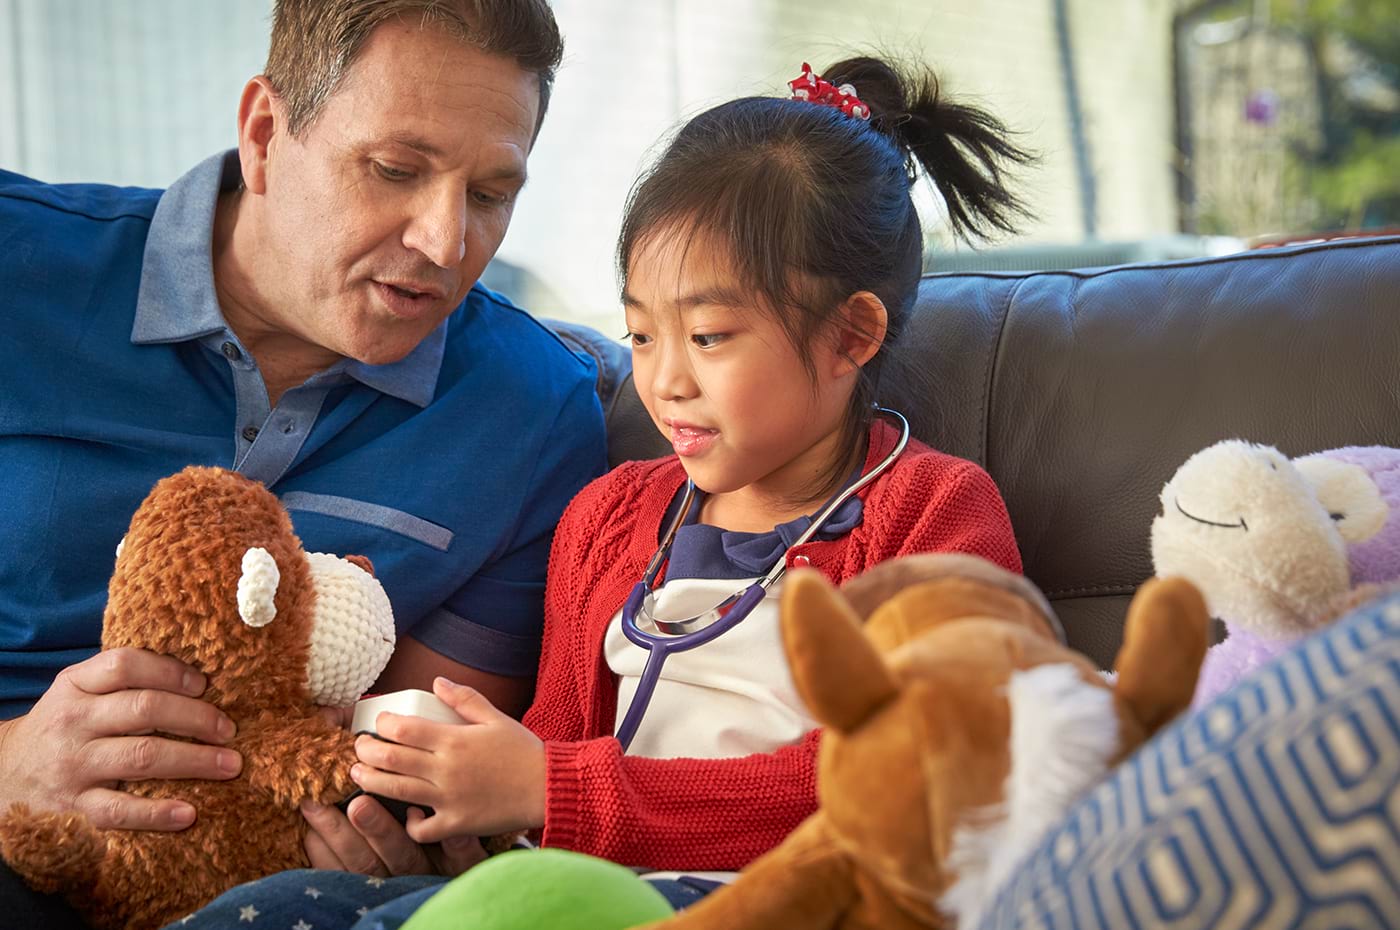 An adult holding a teddy bear and playing with a child who has a stethoscope.  